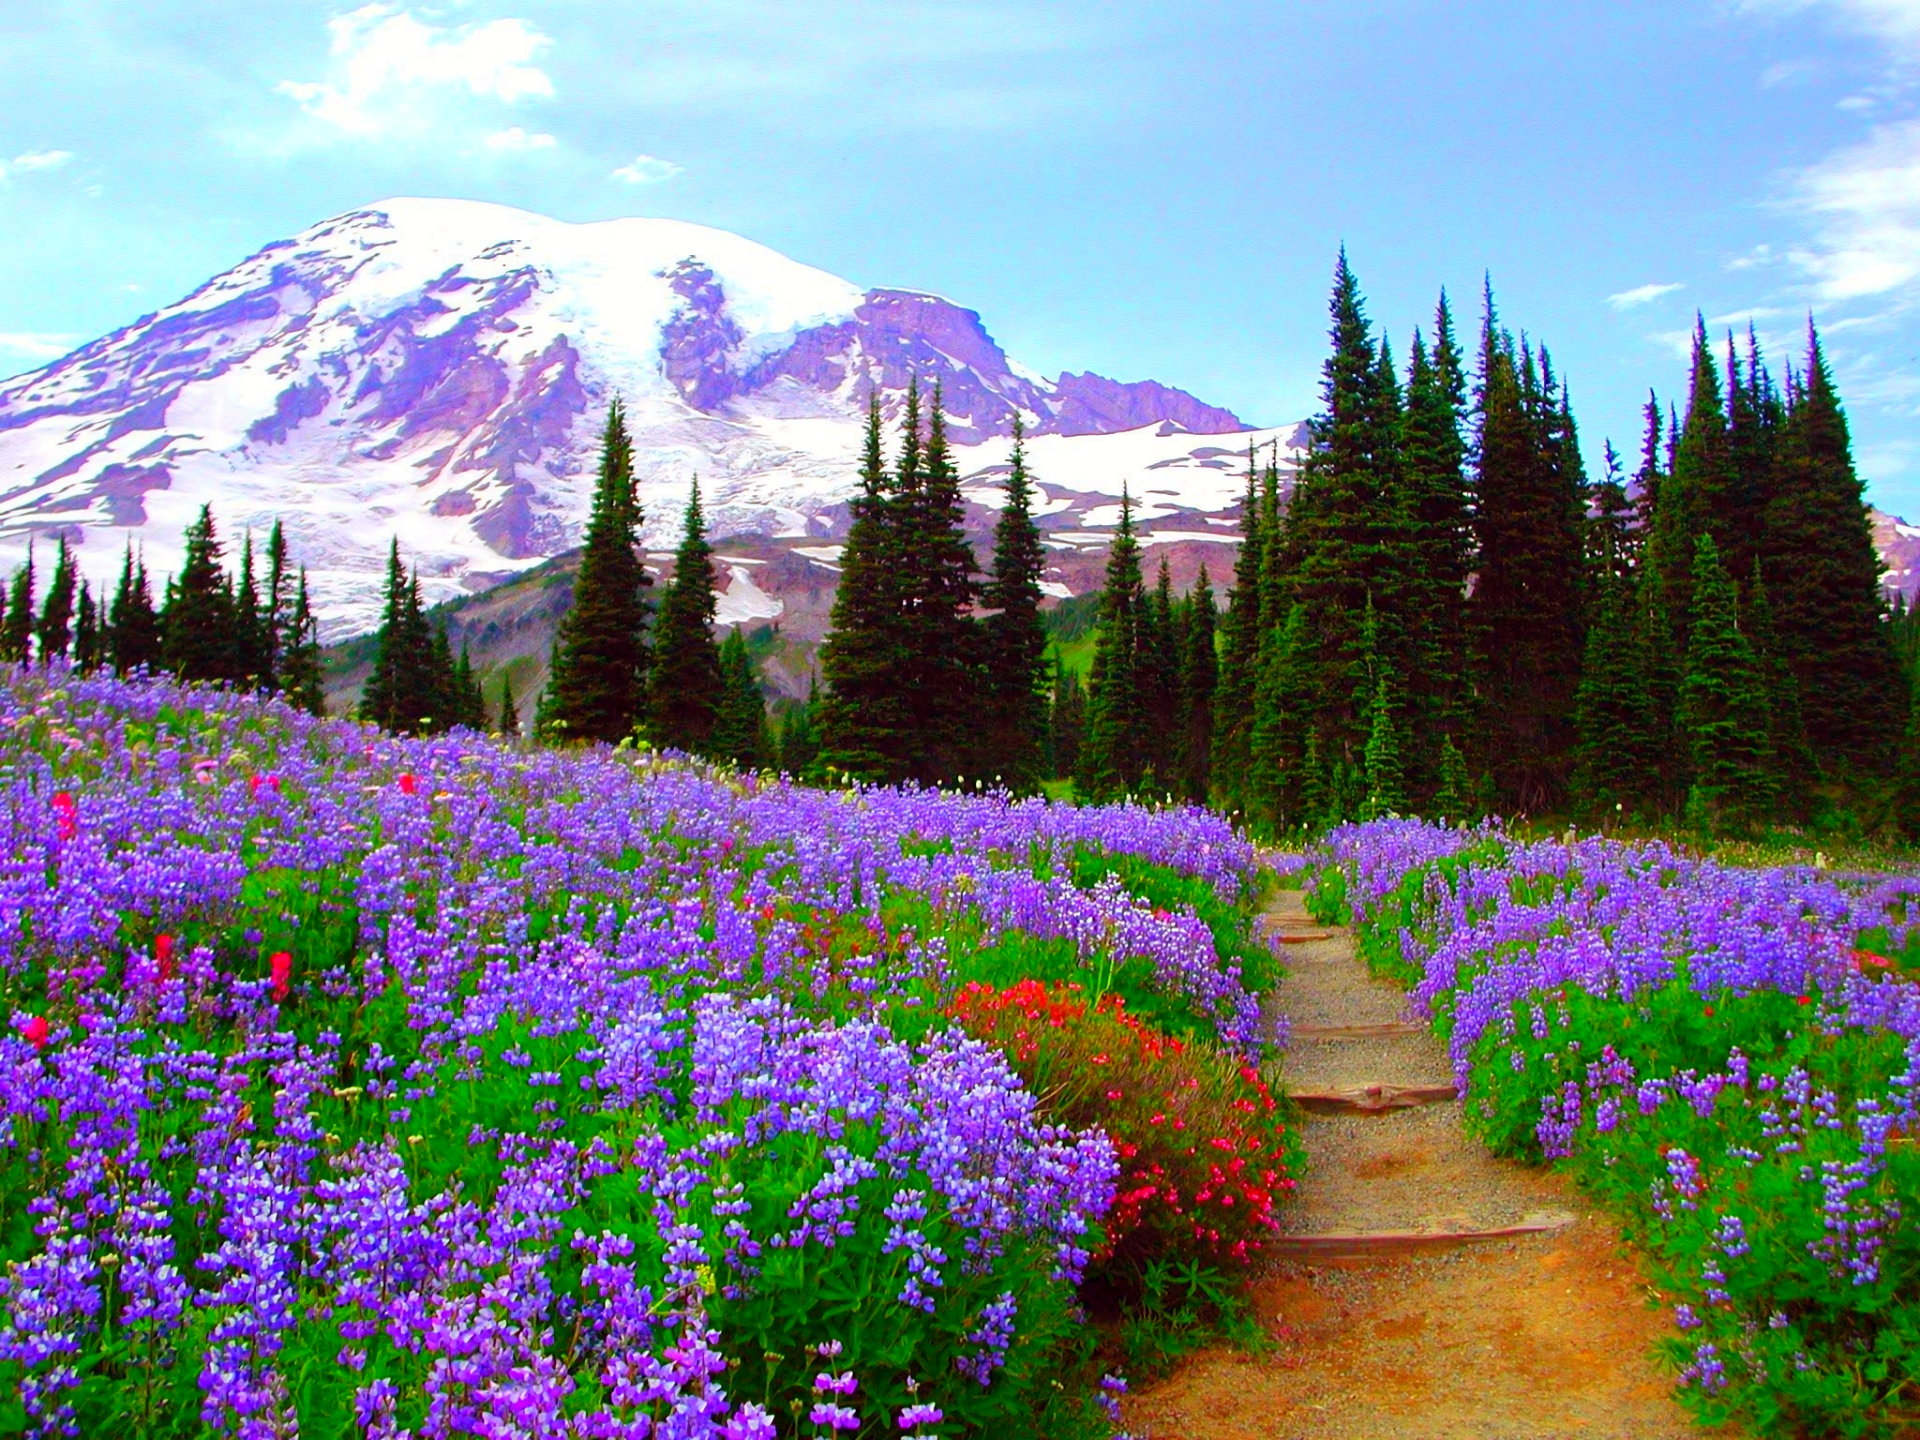 Flower Field in the Mountains HD Wallpaper. Background Image